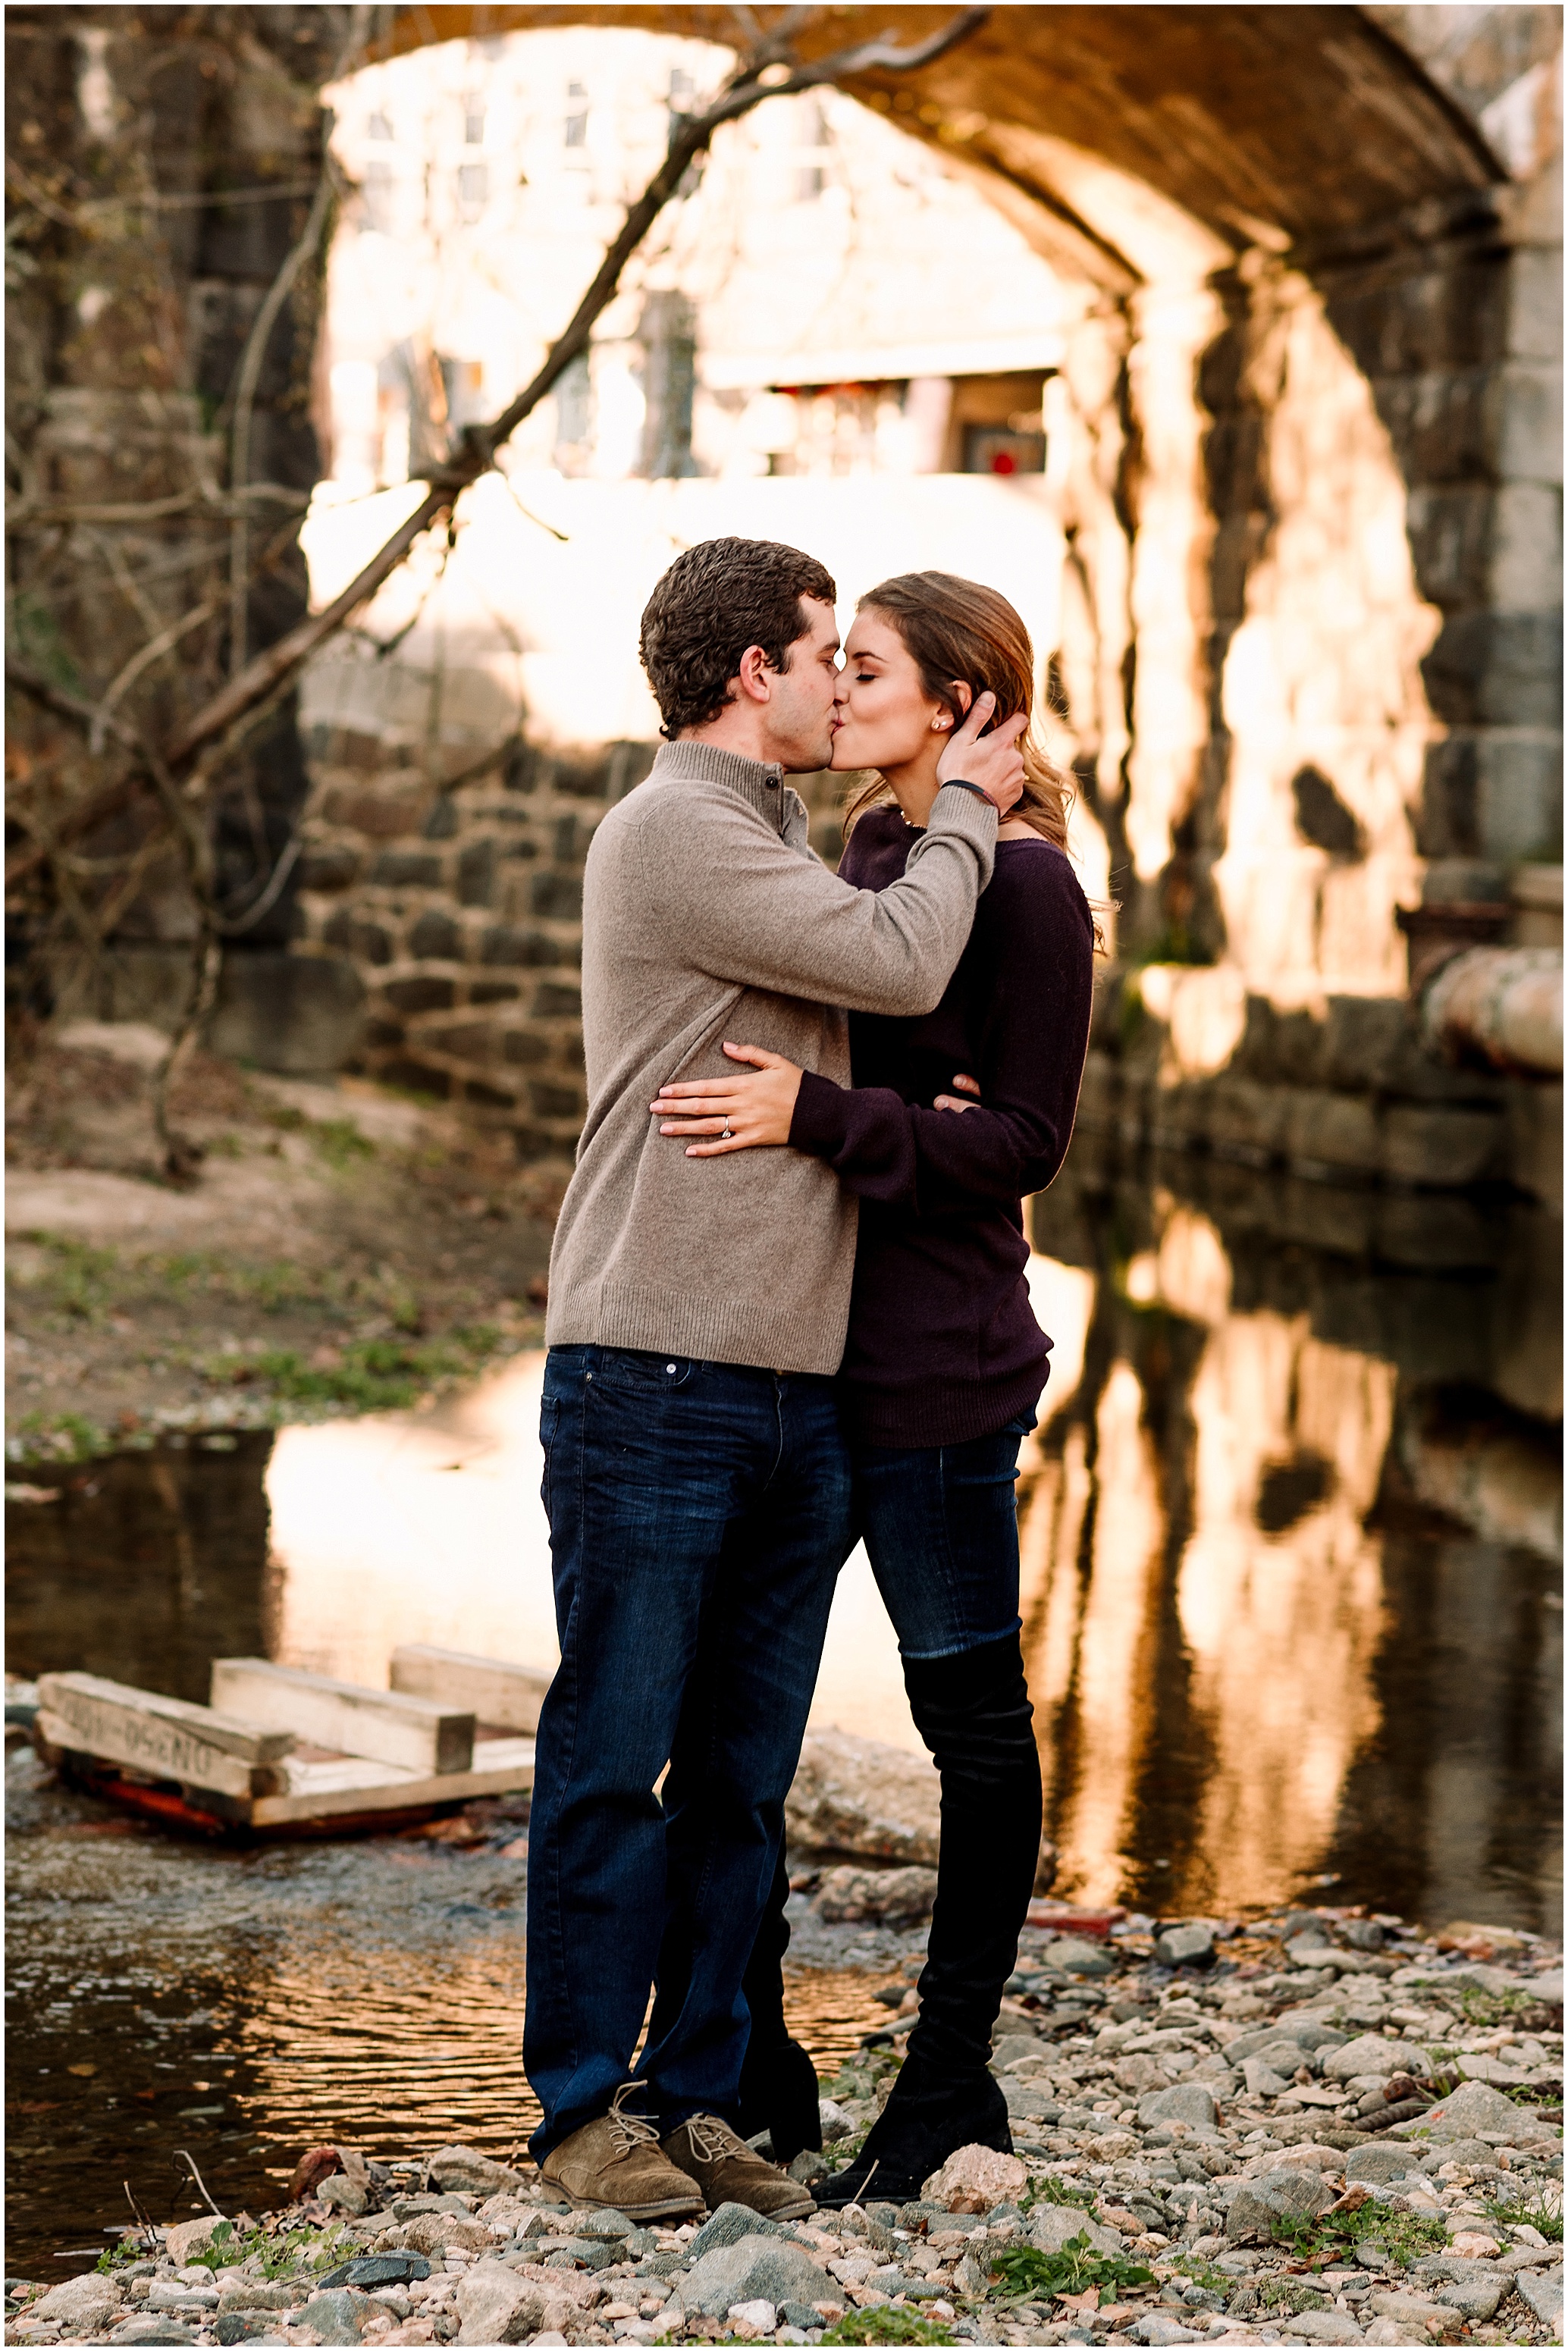 Hannah Leigh Photography Ellicott City MD Engagement Session_6936.jpg